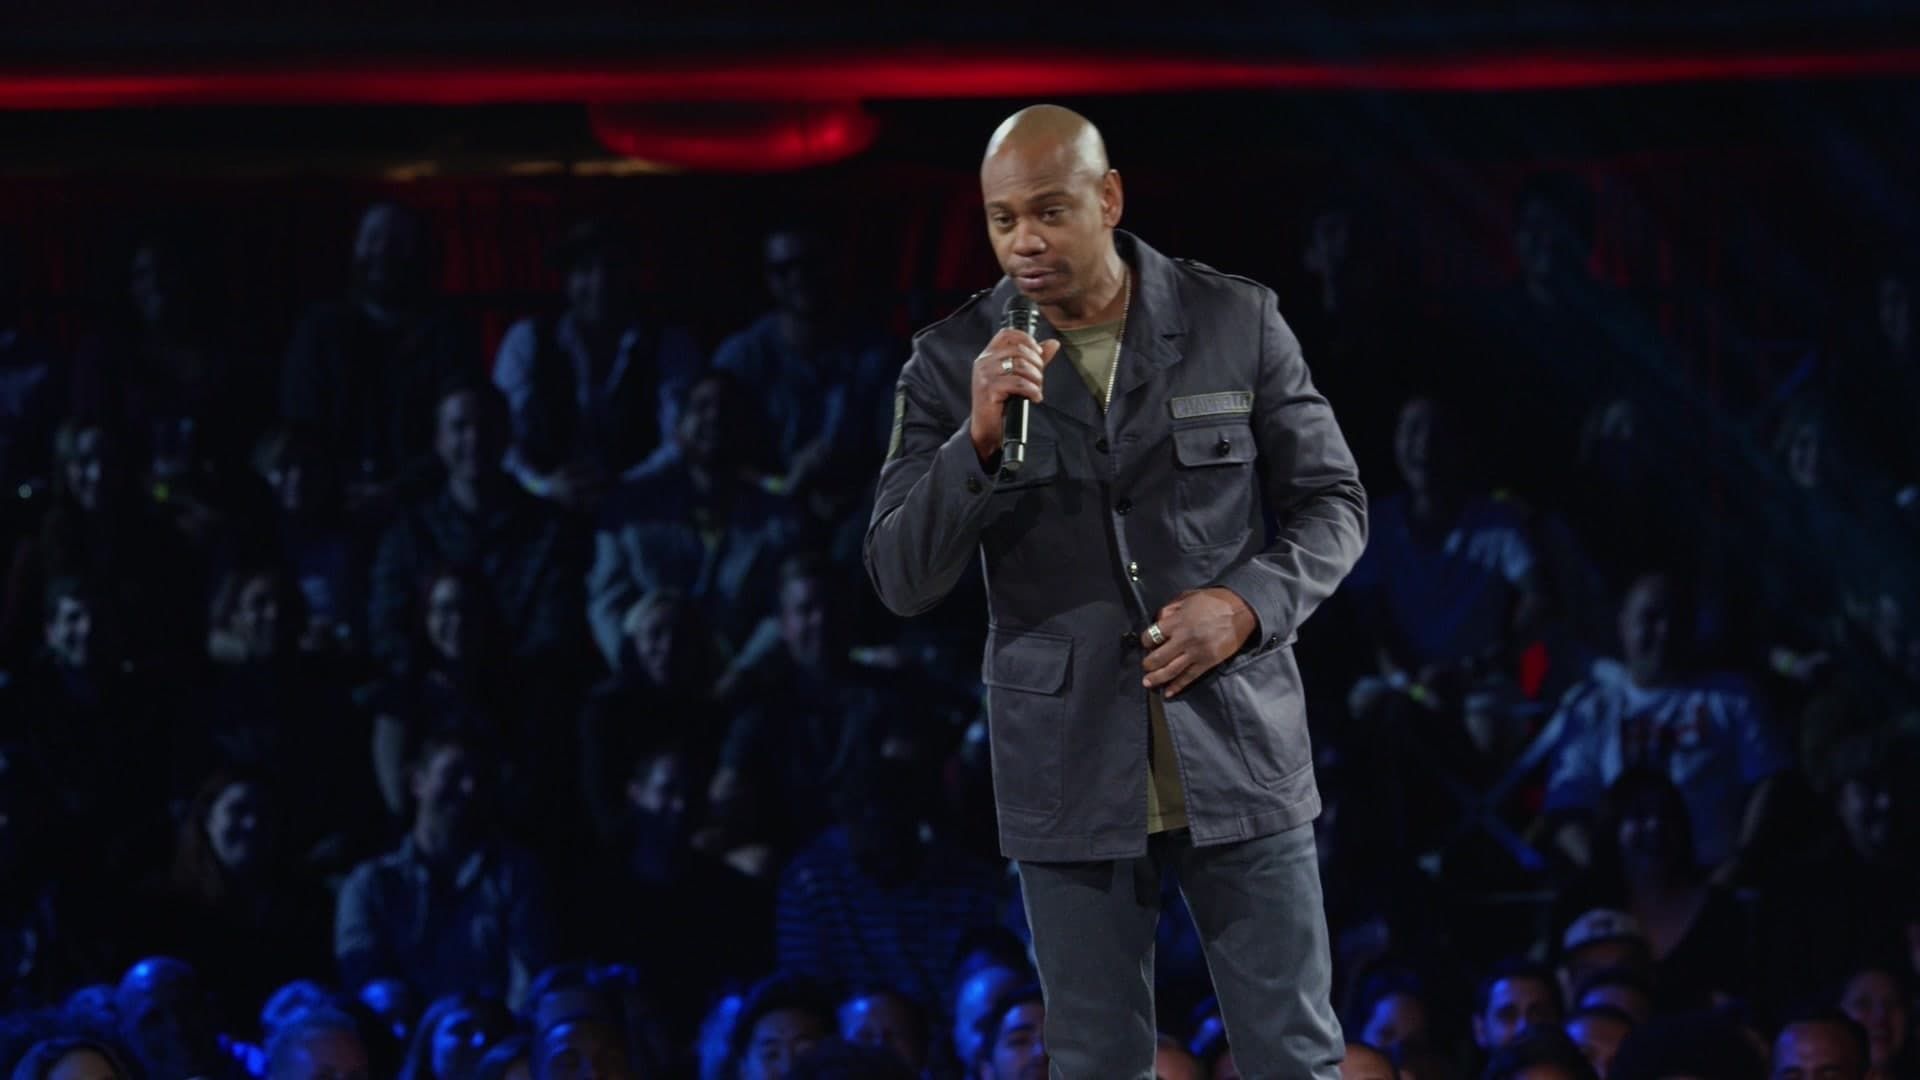 The Age of Spin: Dave Chappelle Live at the Hollywood Palladium background